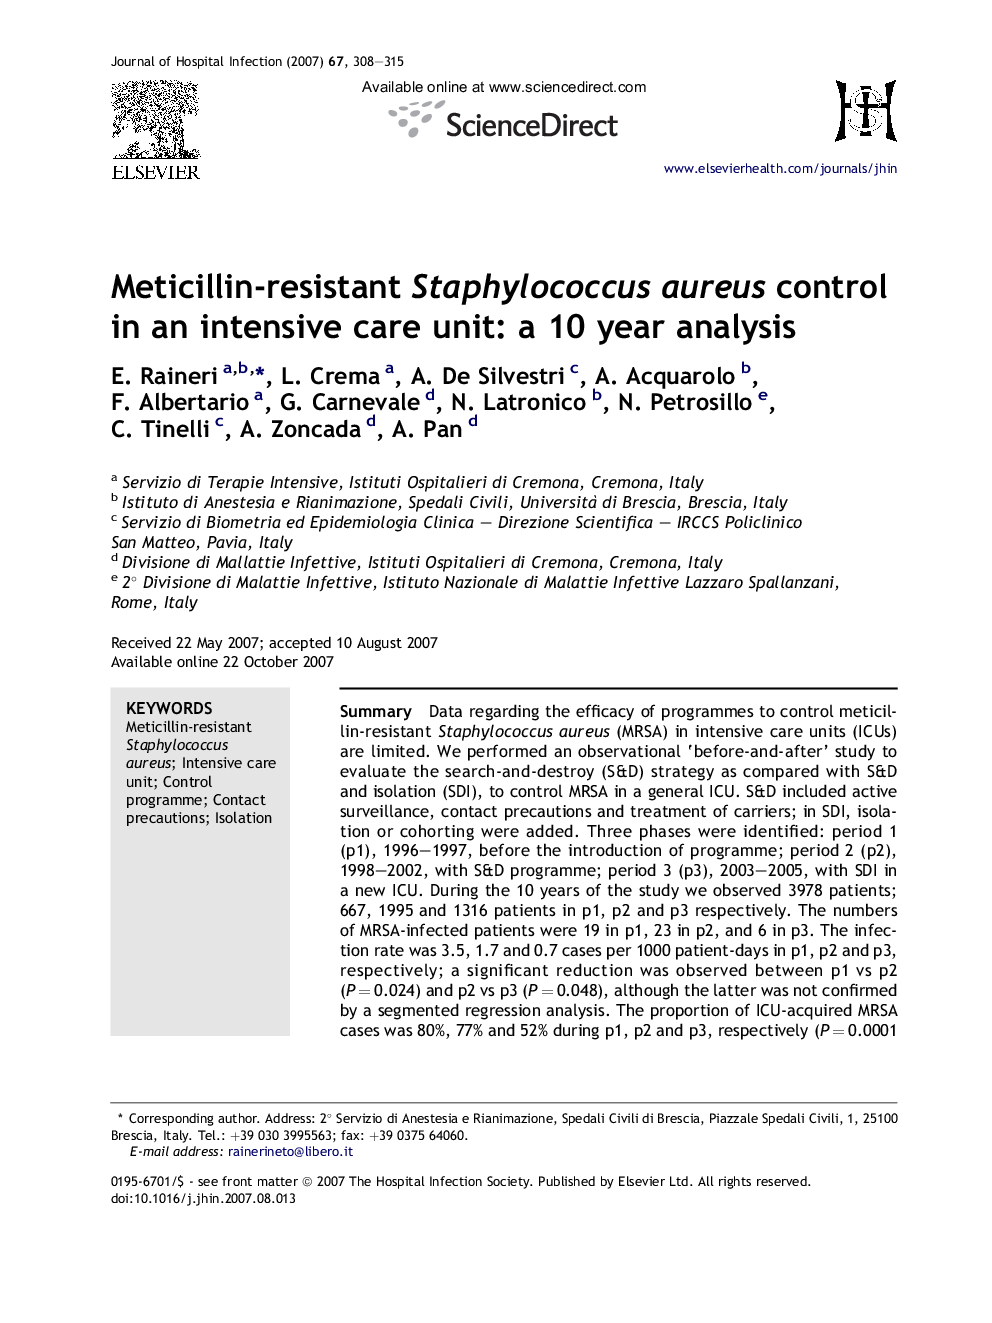 Meticillin-resistant Staphylococcus aureus control in an intensive care unit: a 10 year analysis